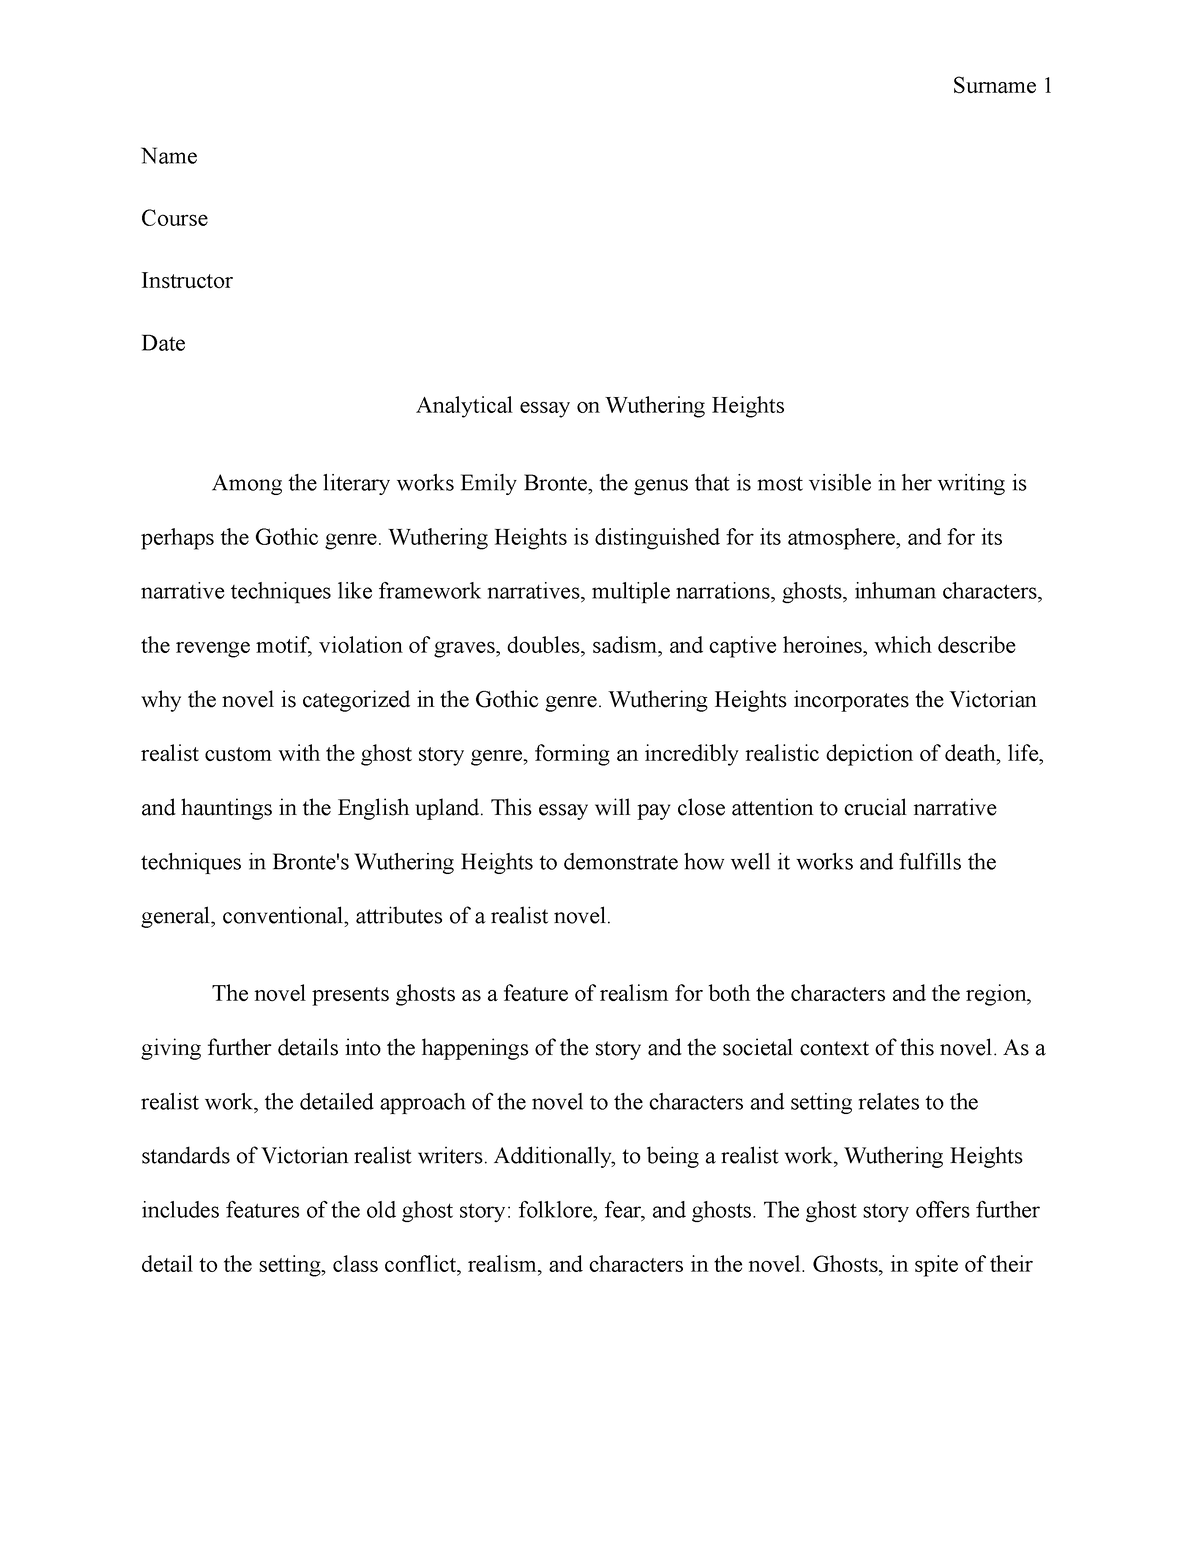 wuthering heights essay introduction